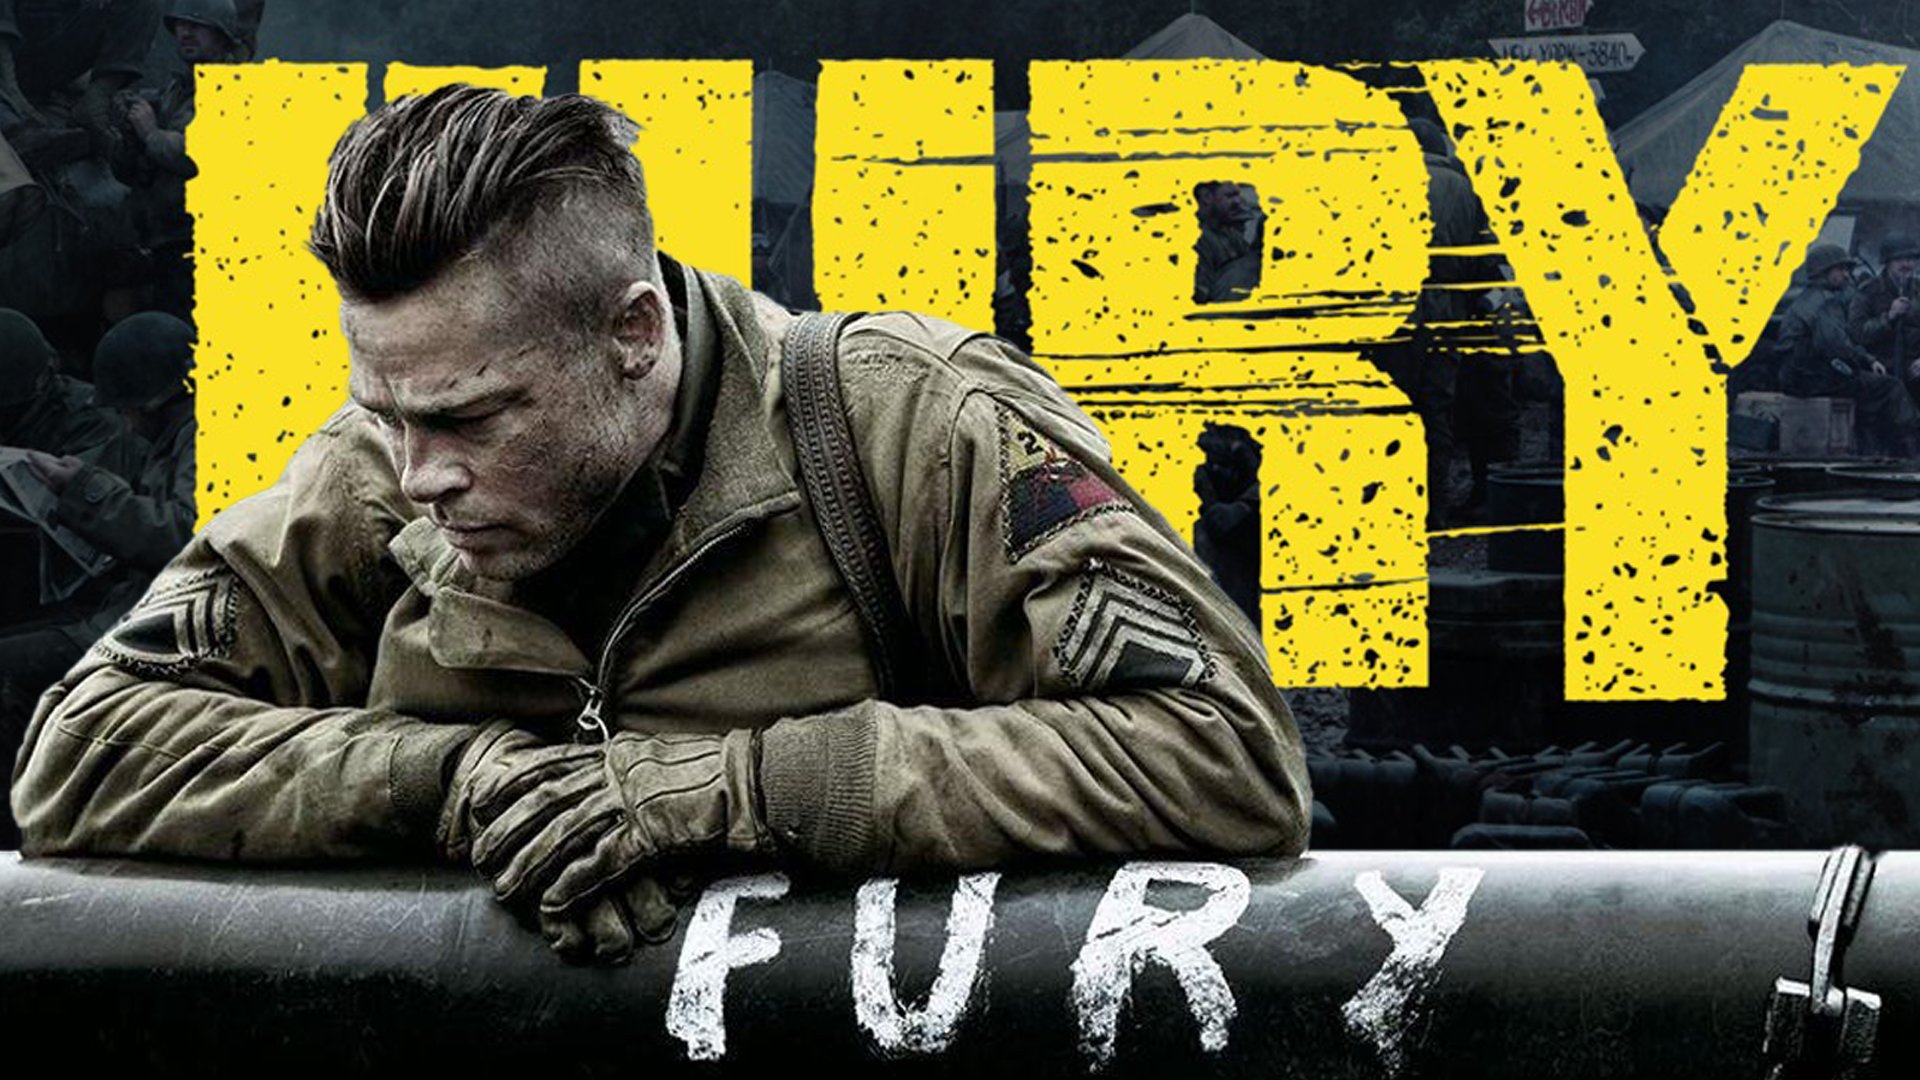 Fury set the bar high for tank movies, but there's a few things you probably didn't know about the WWII drama starring Brad Pitt and Shia LaBeouf. Compisite by Coffee or Die Magazine.